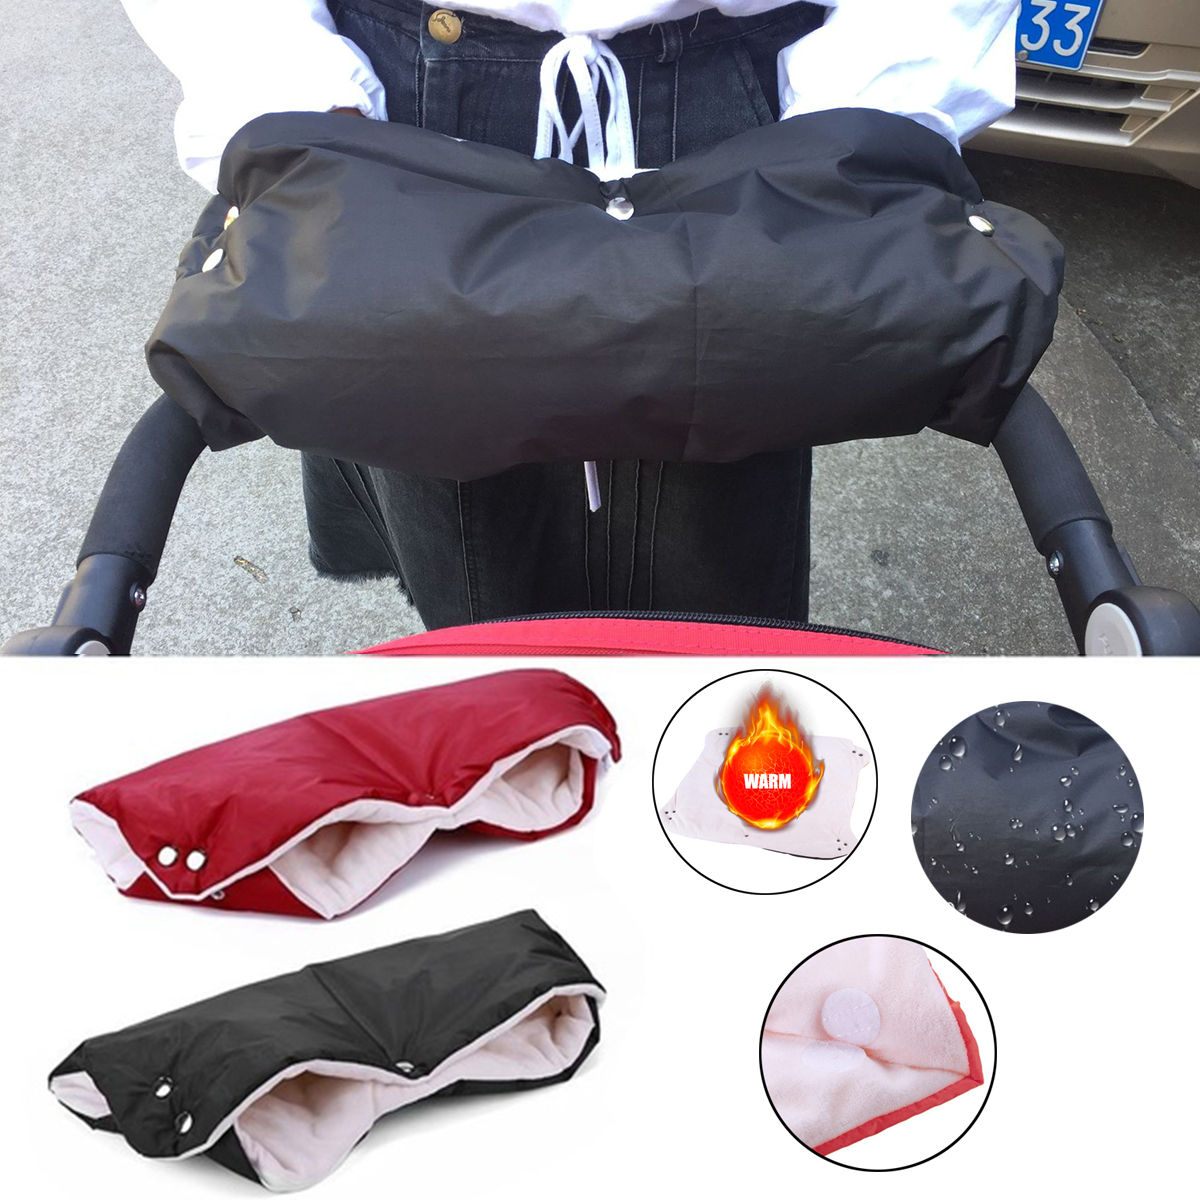 Baby-Stroller-Waterproof-Anti-freeze-Gloves-Winter-Pushchair-Warmer-Hand-Cover-Outdoor-Hiking-Travel-1698150-1